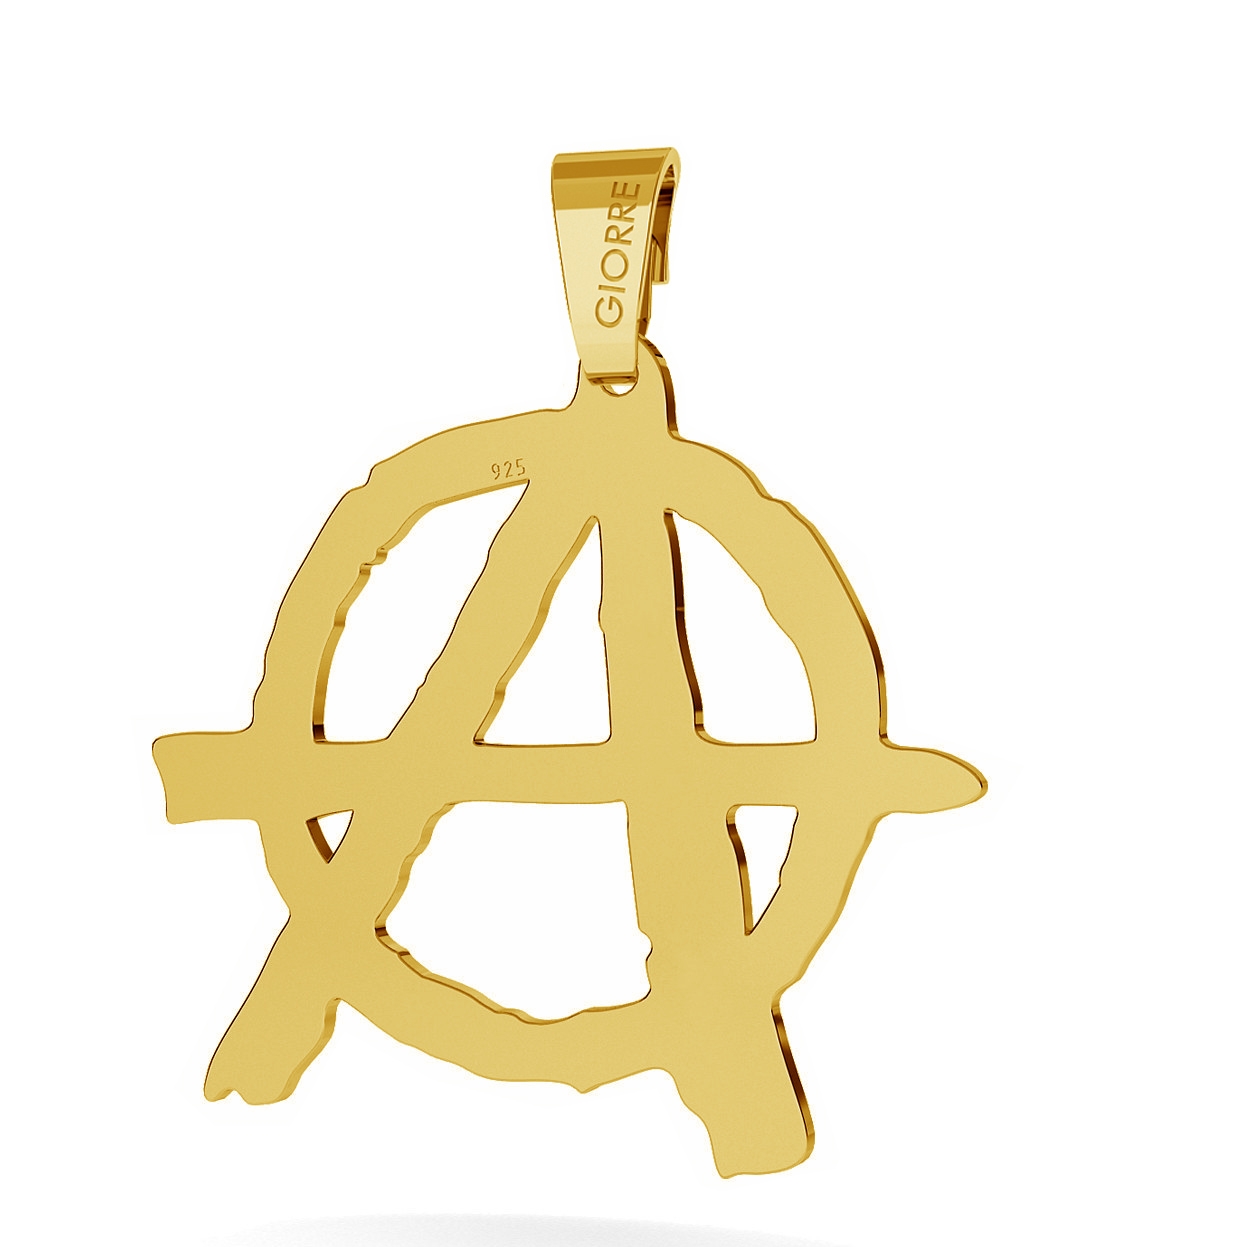 CHARM 135, ANARCHY SYMBOL WITH ENGRAVE, STERLING SILVER (925) RHODIUM OR GOLD PLATED